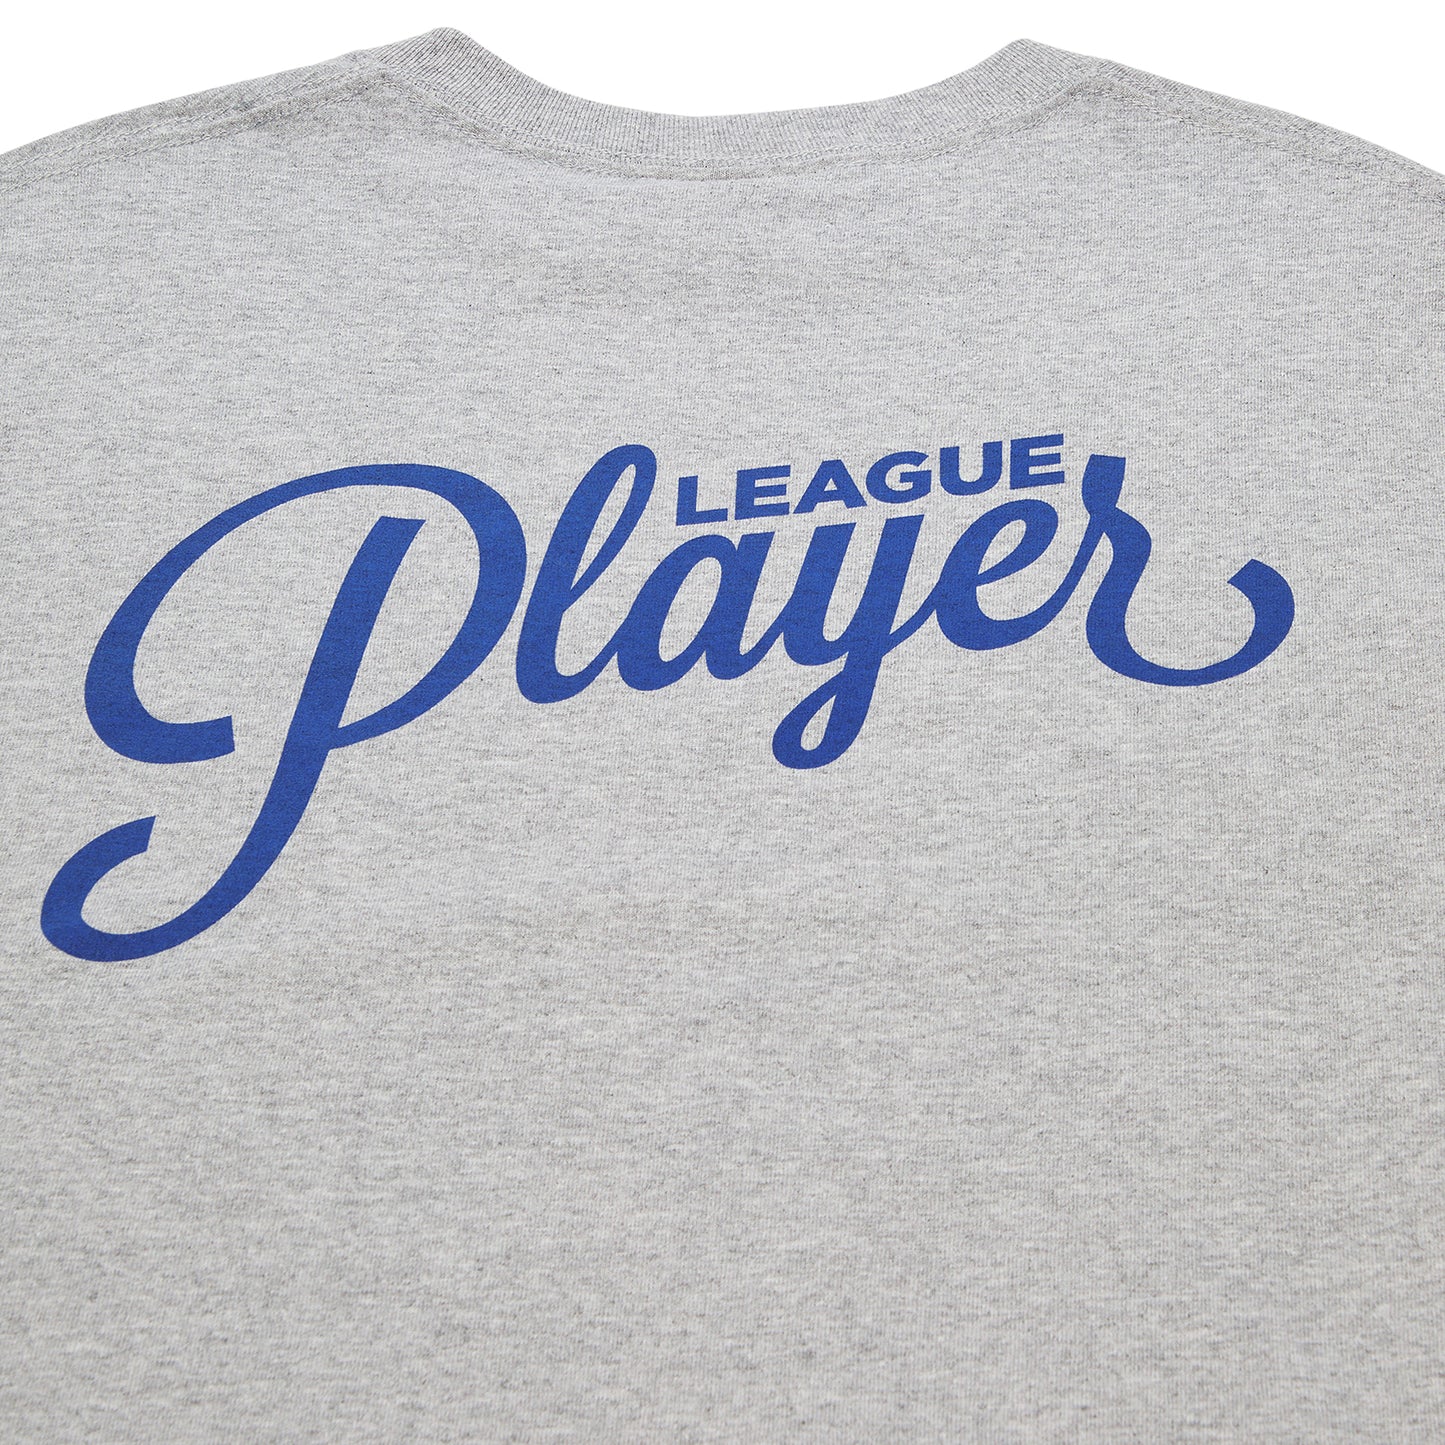 Alltimers League Player Tee (Heather Grey)